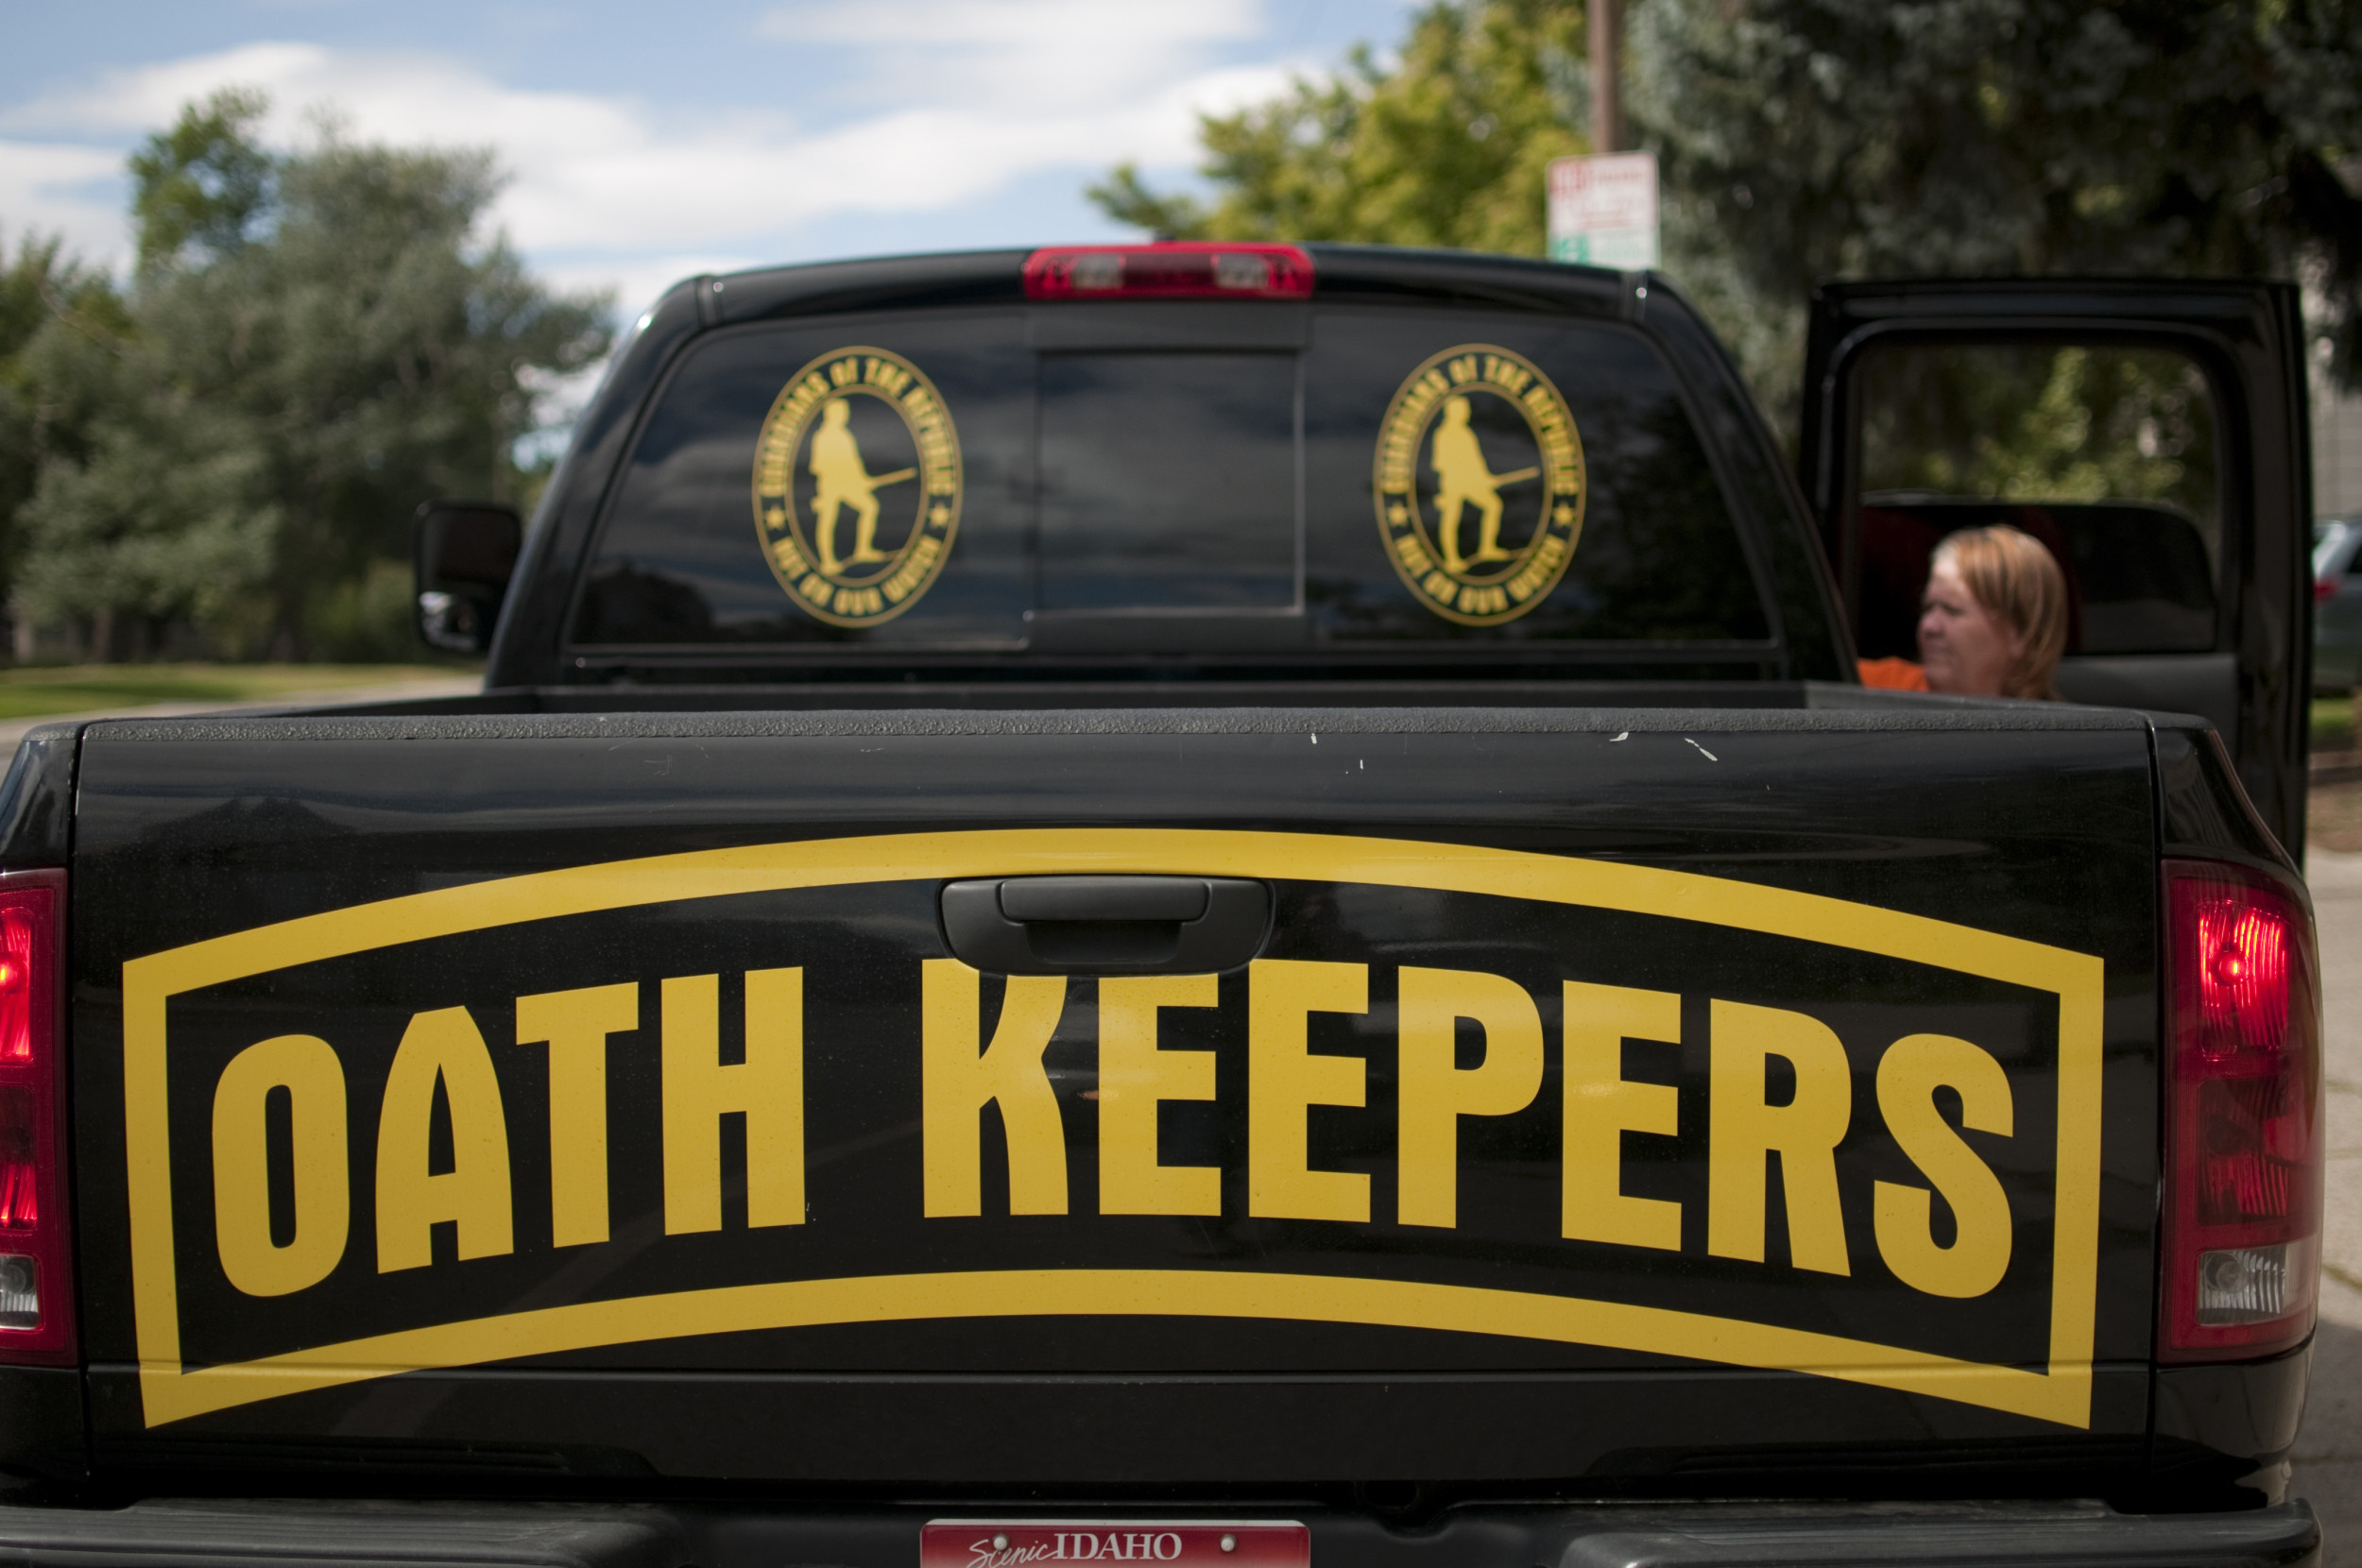 An Open Letter to Oath Keepers